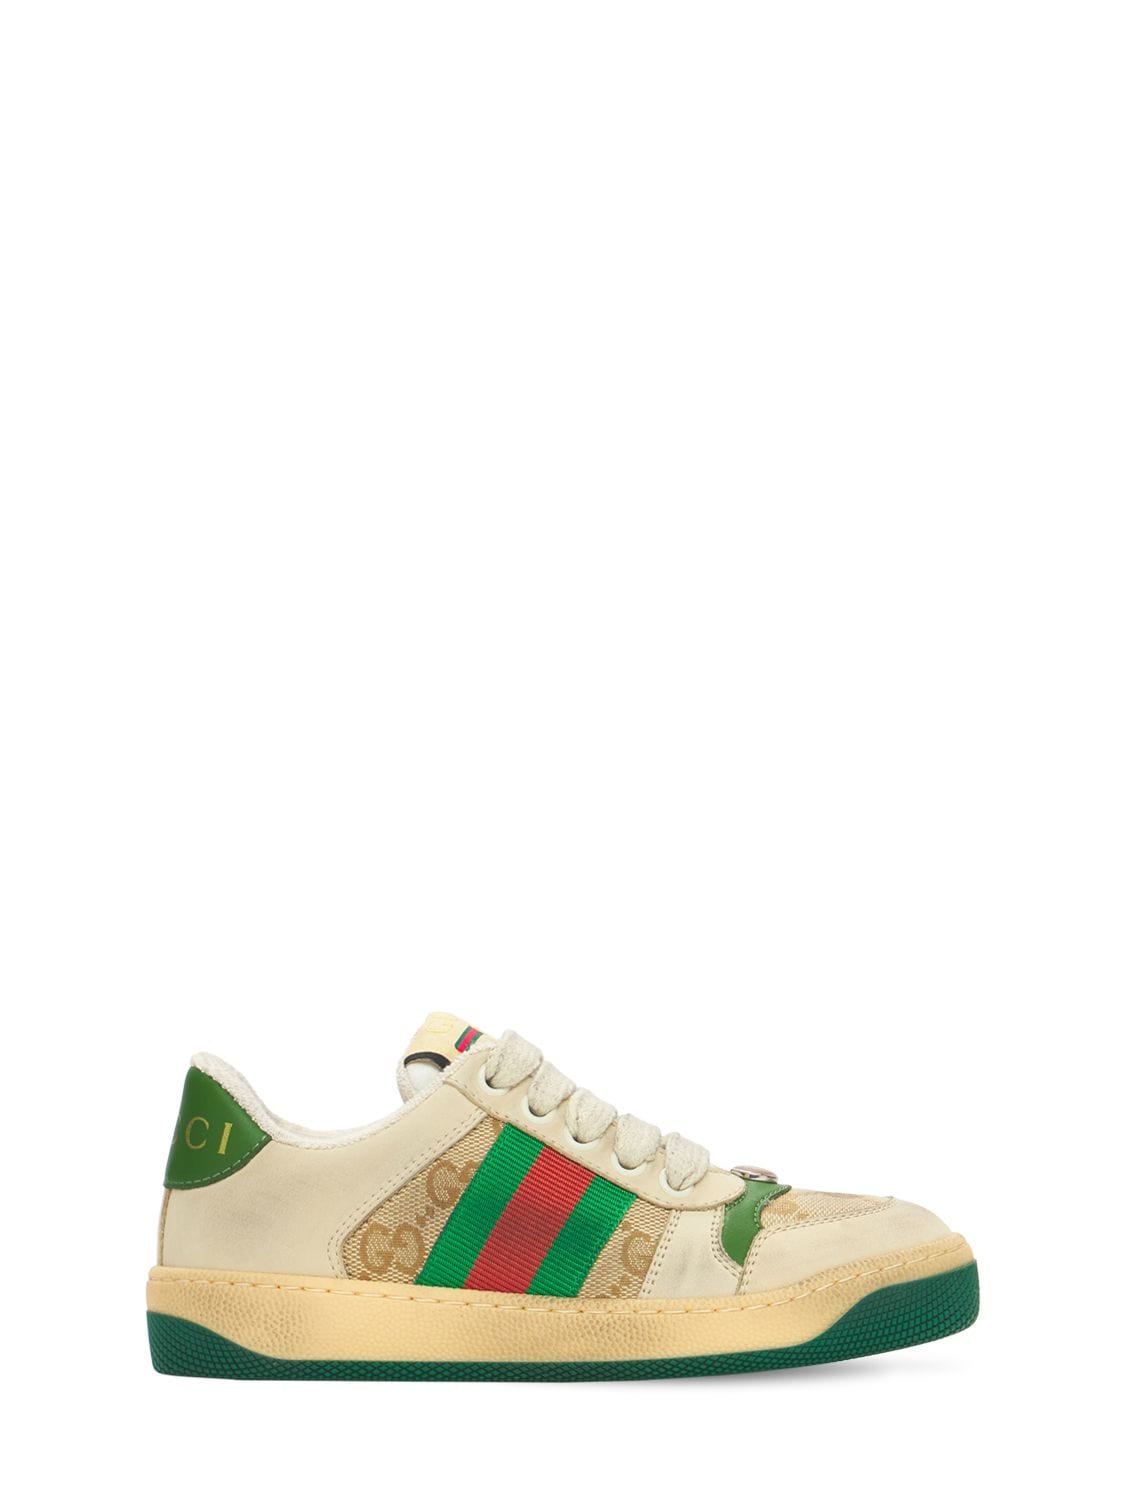 Gucci Kids' Gg Canvas Trainers W/ Web Detail In Beige